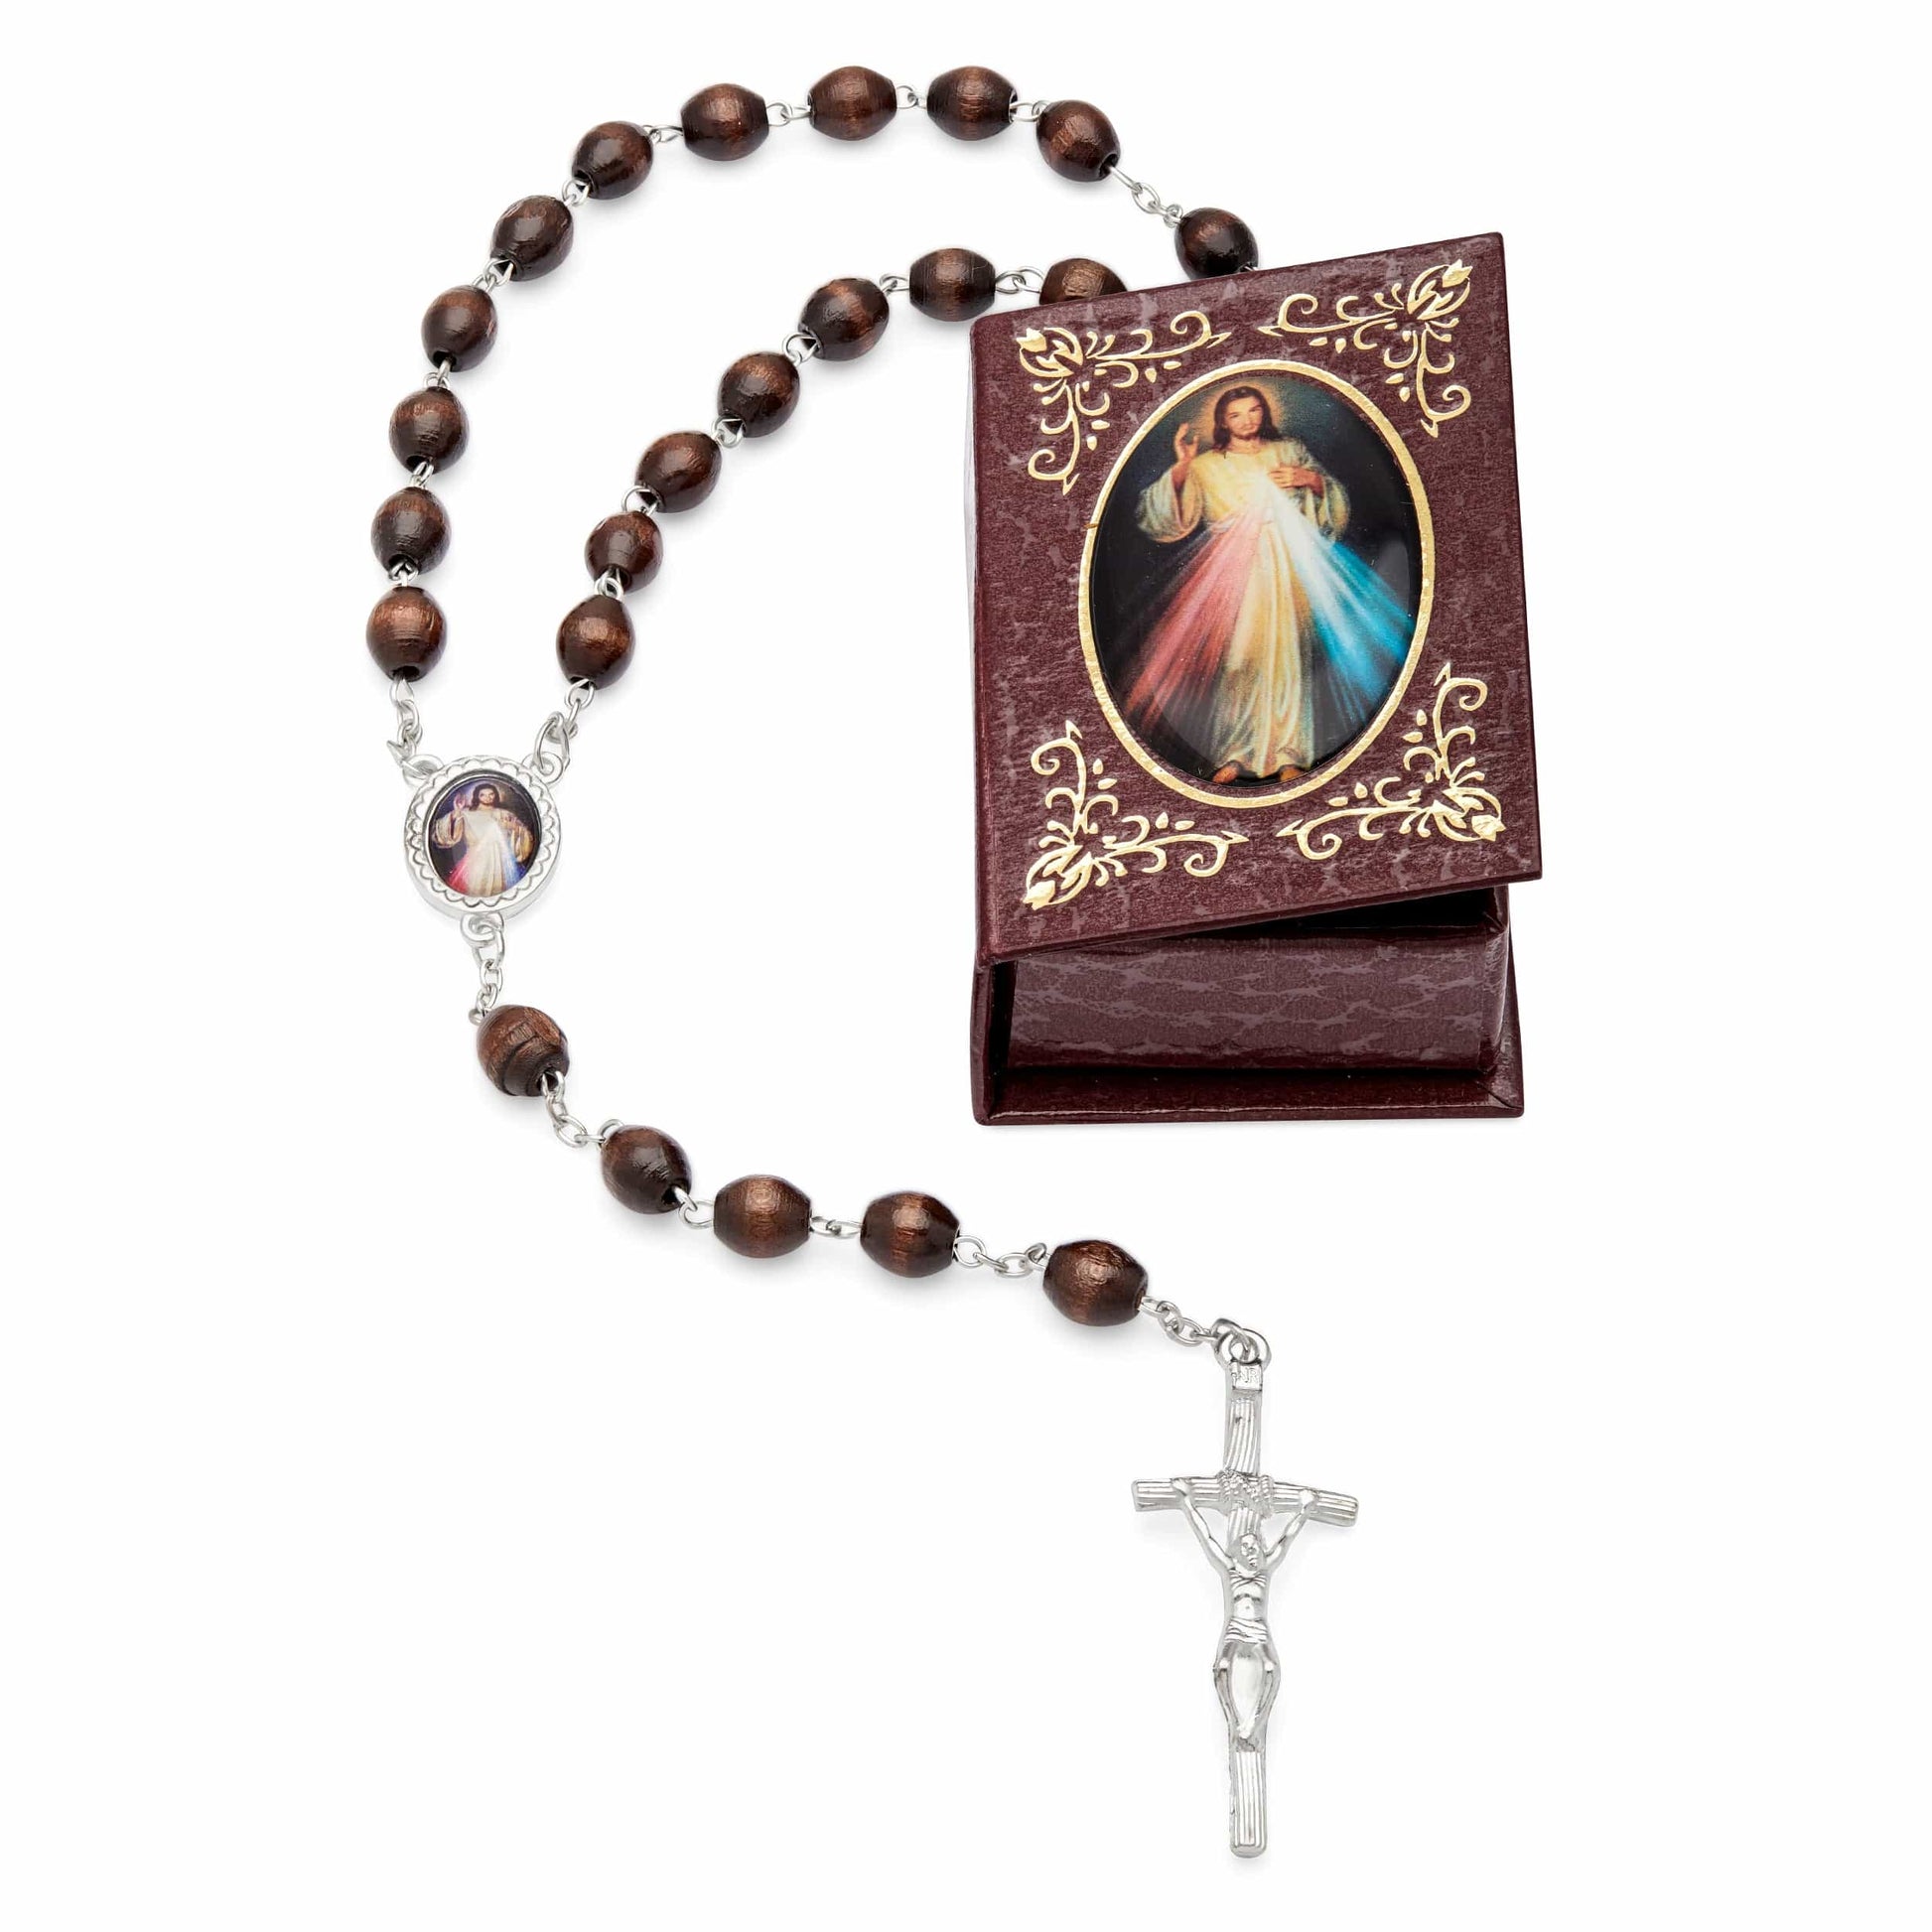 MONDO CATTOLICO Prayer Beads 53 cm (20.90 in) / 7 mm (0.30 in) Jesus of Divine Mercy Brown Case and Rosary